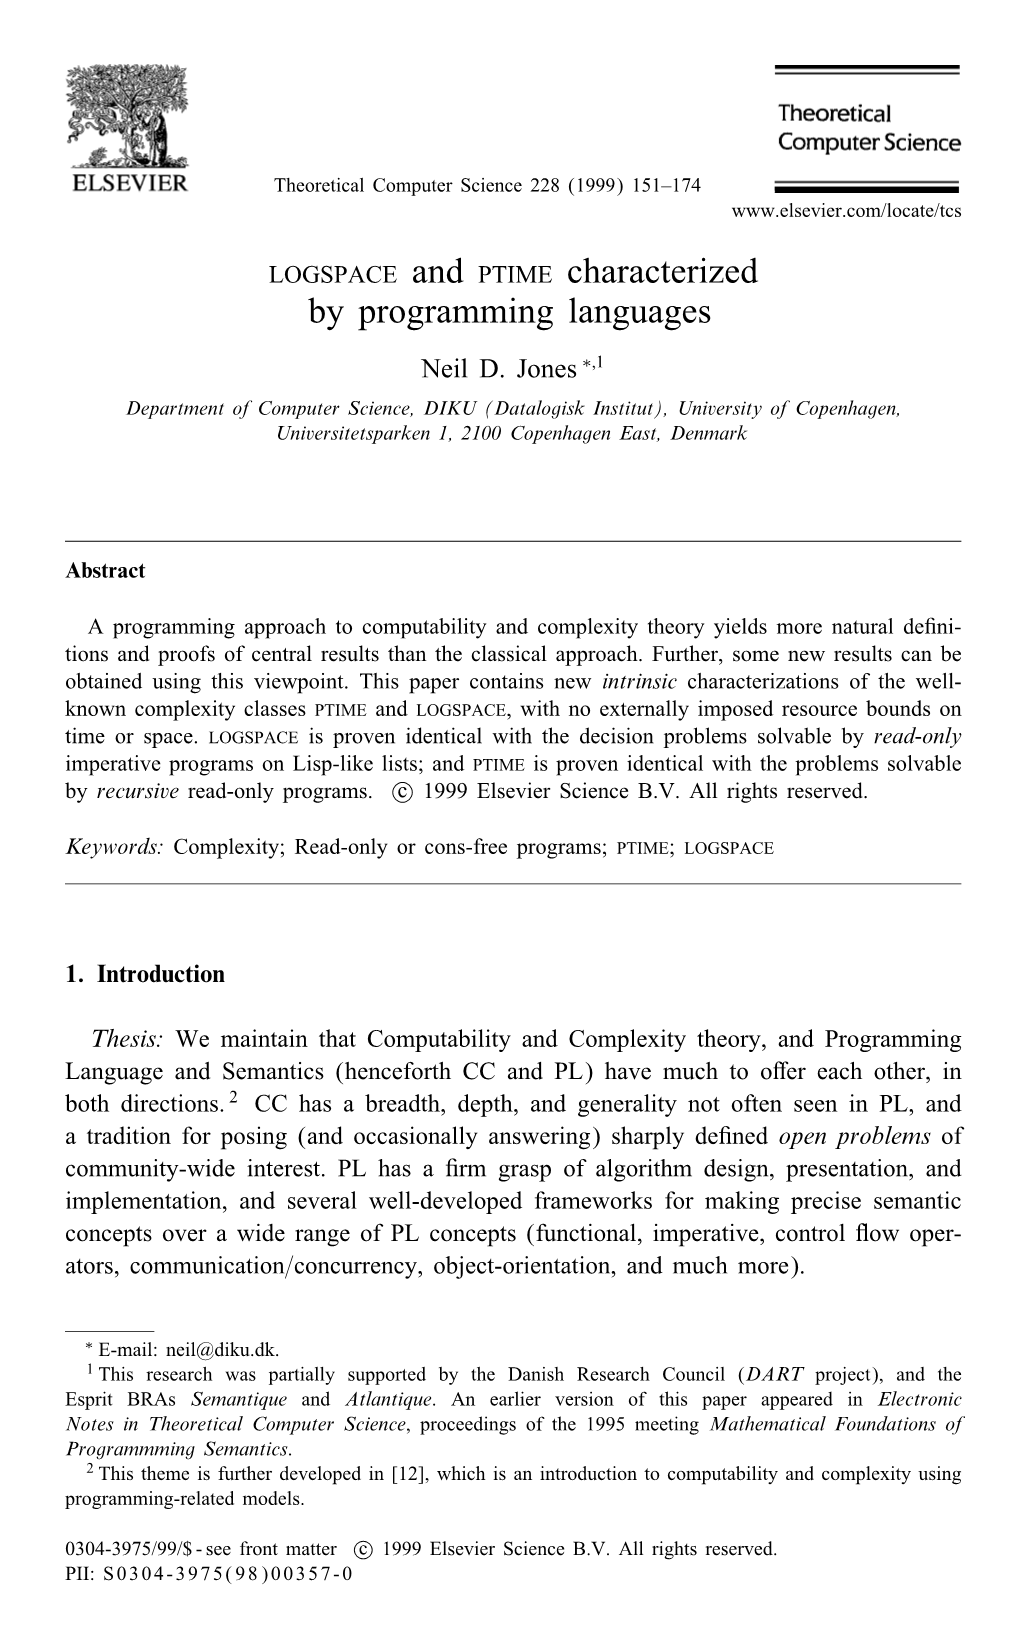 LOGSPACE and PTIME Characterized by Programming Languages